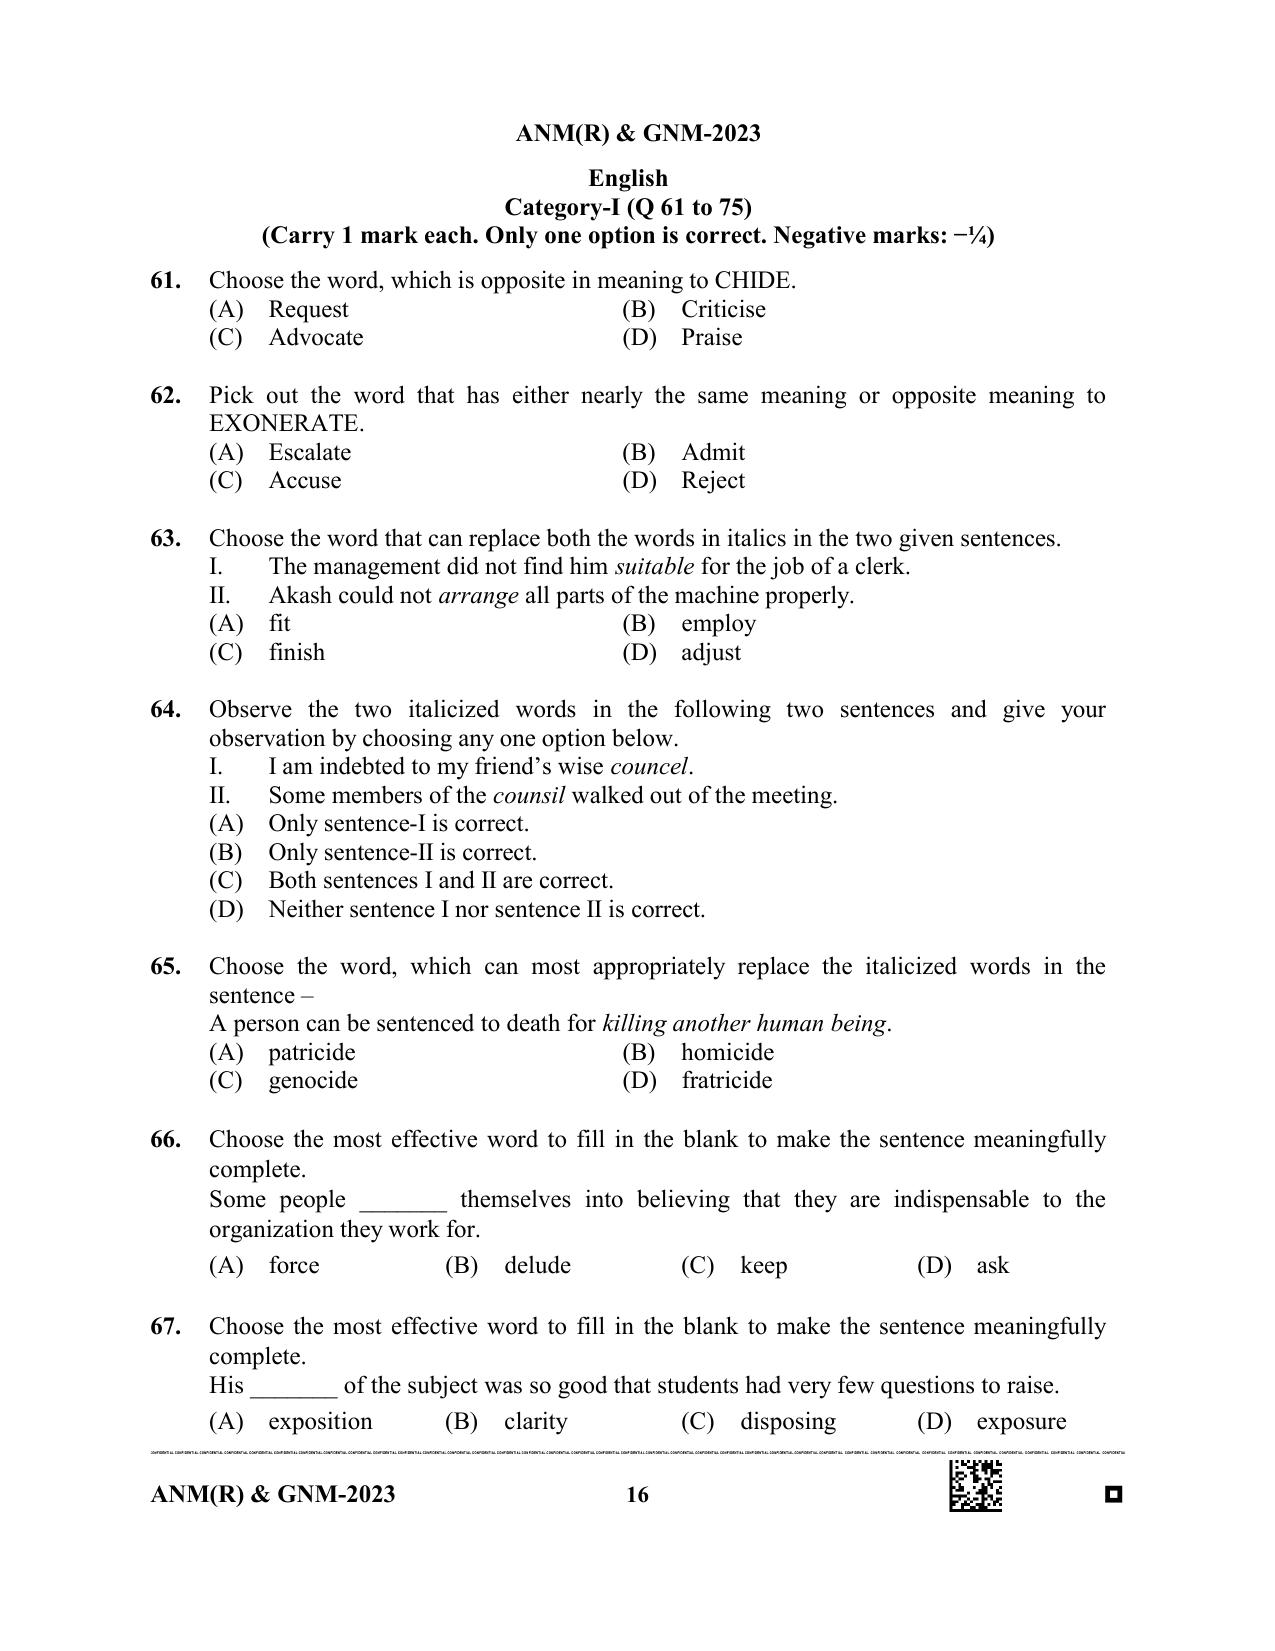 WB ANM GNM 2023 Question Paper - Page 16